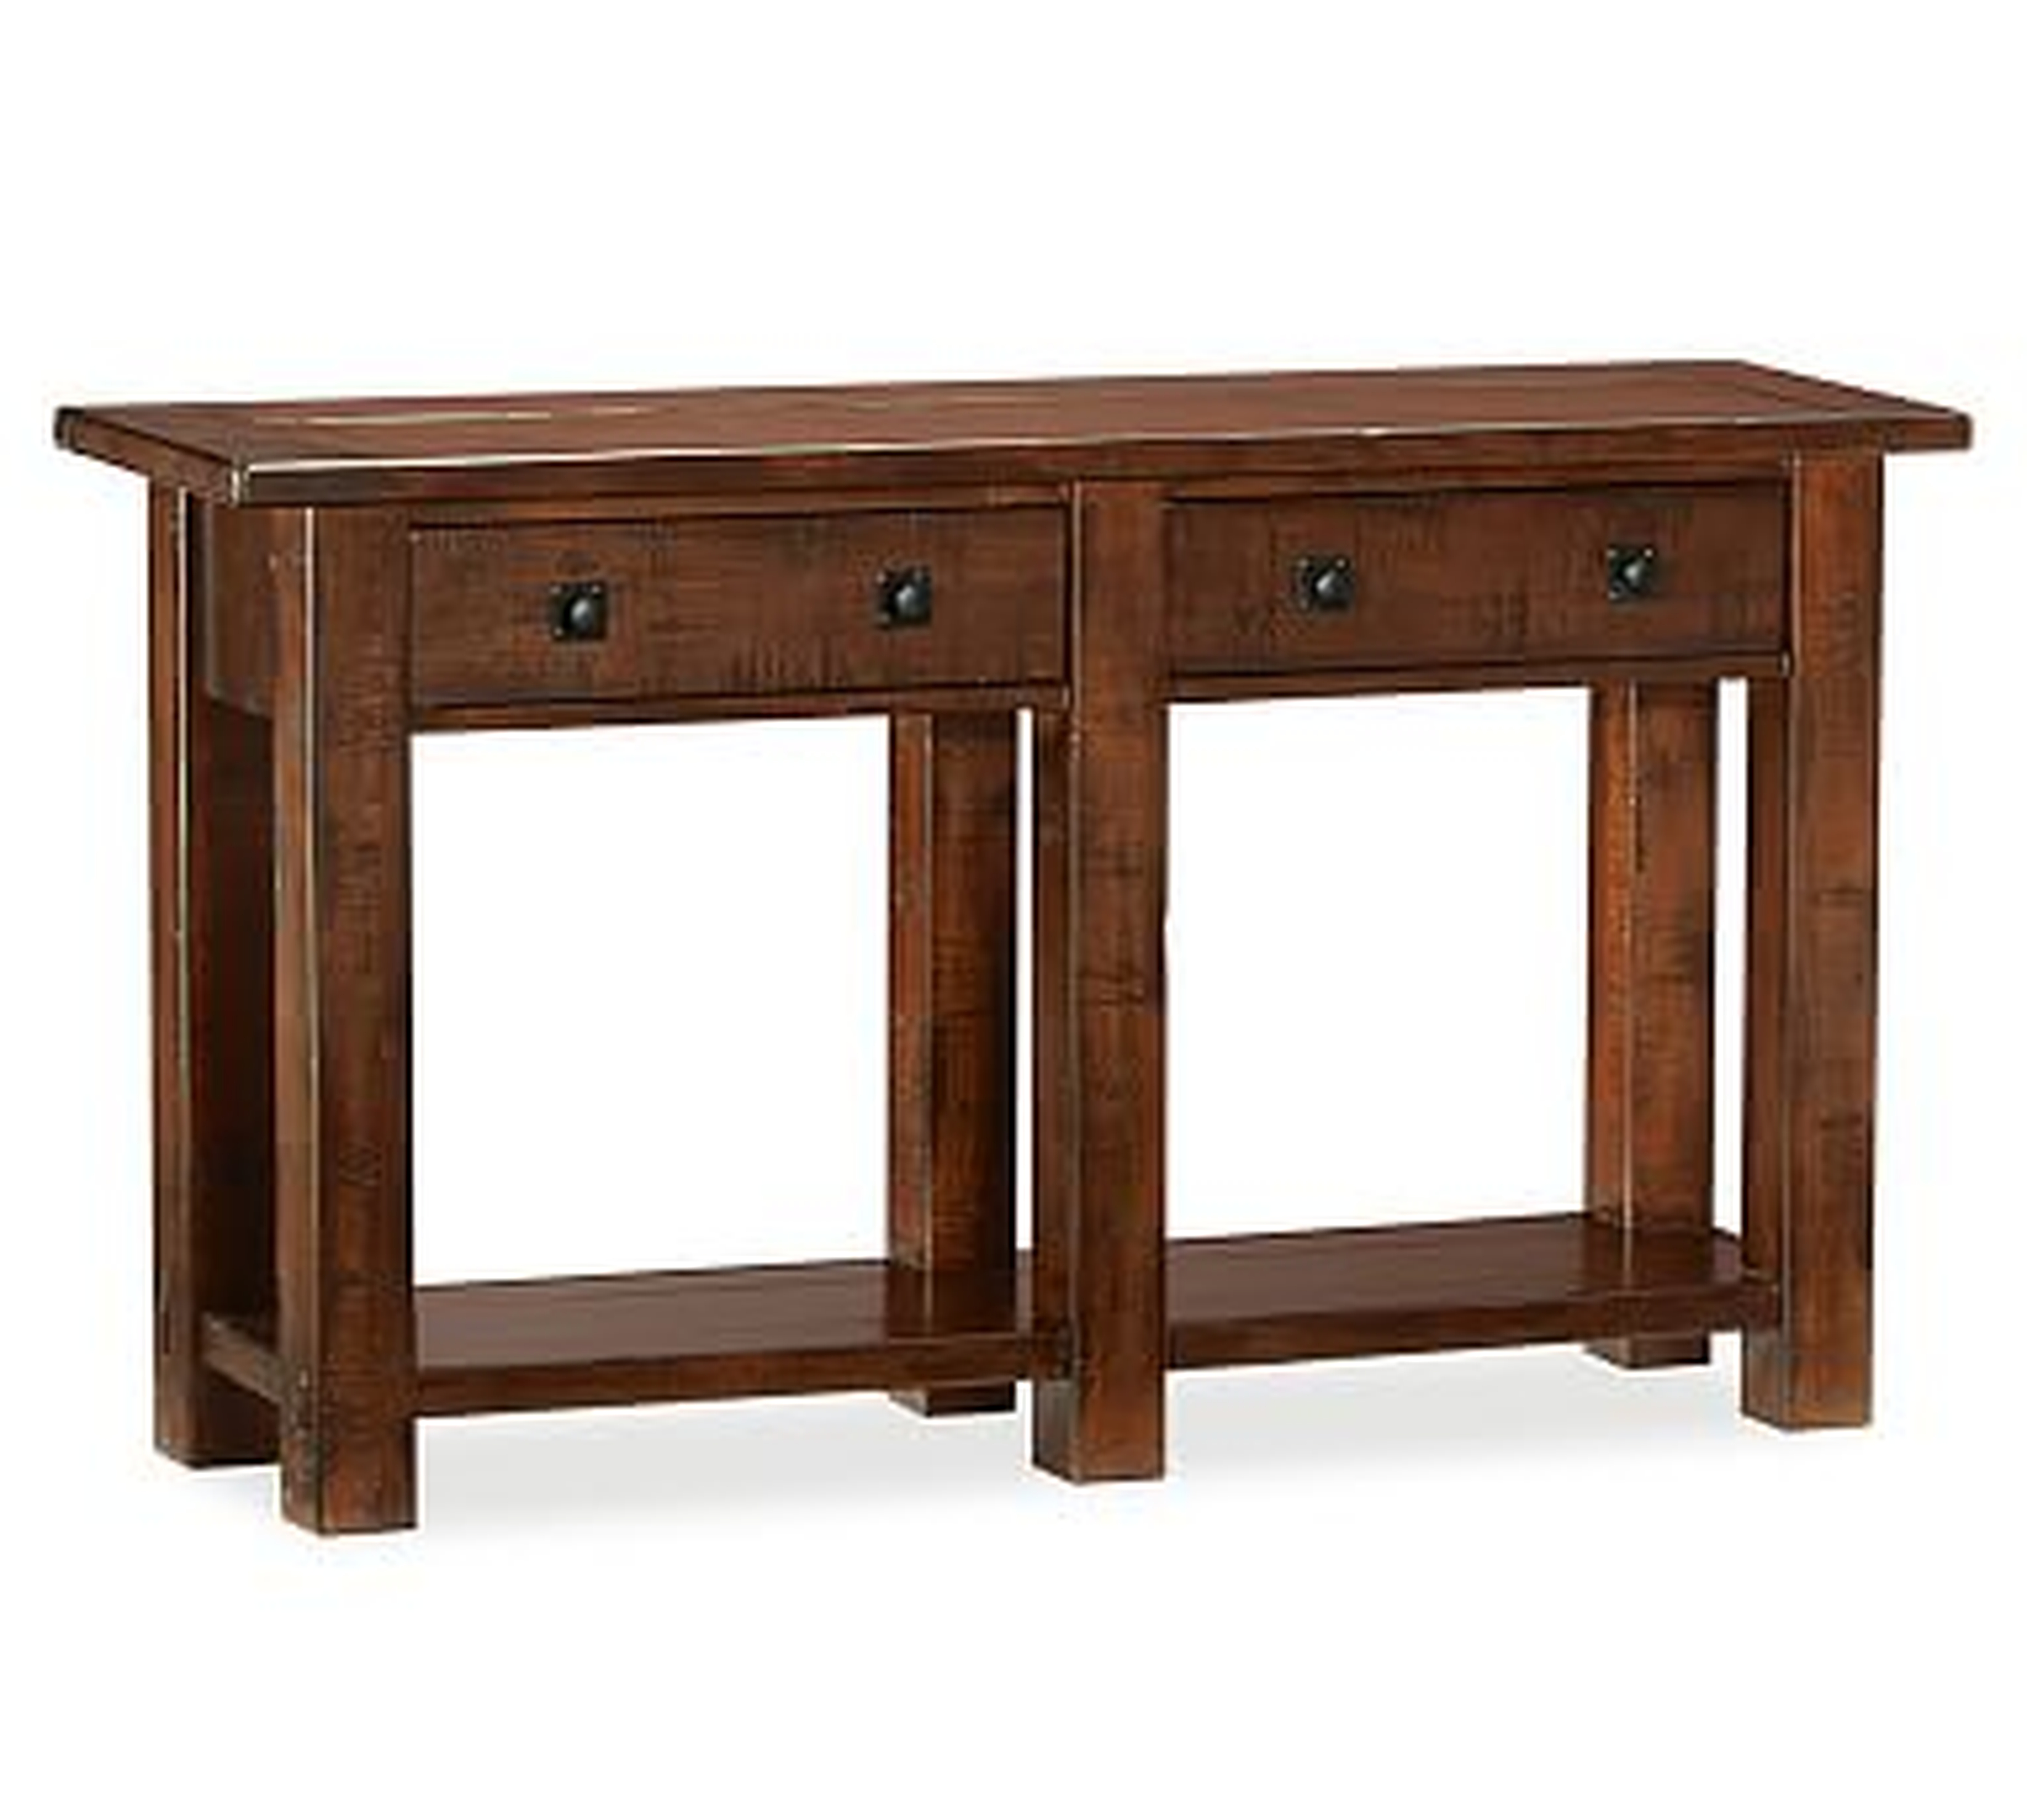 Benchwright 54" Wood Console Table with Drawers, Rustic Mahogany - Pottery Barn